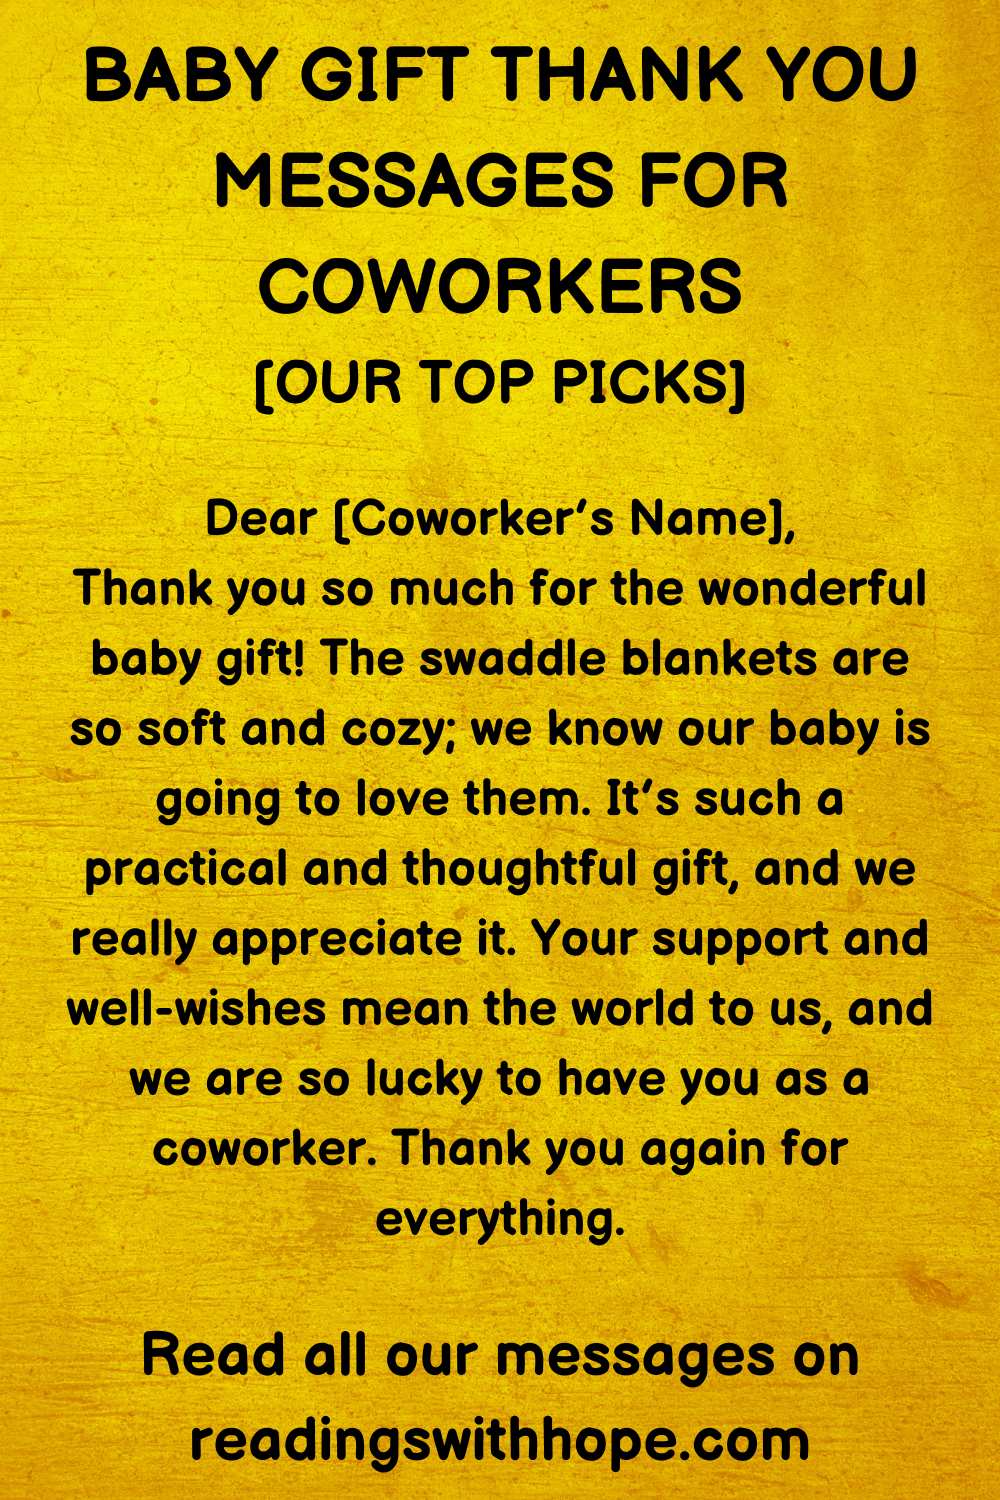 Baby Gift Thank You Message for Coworkers